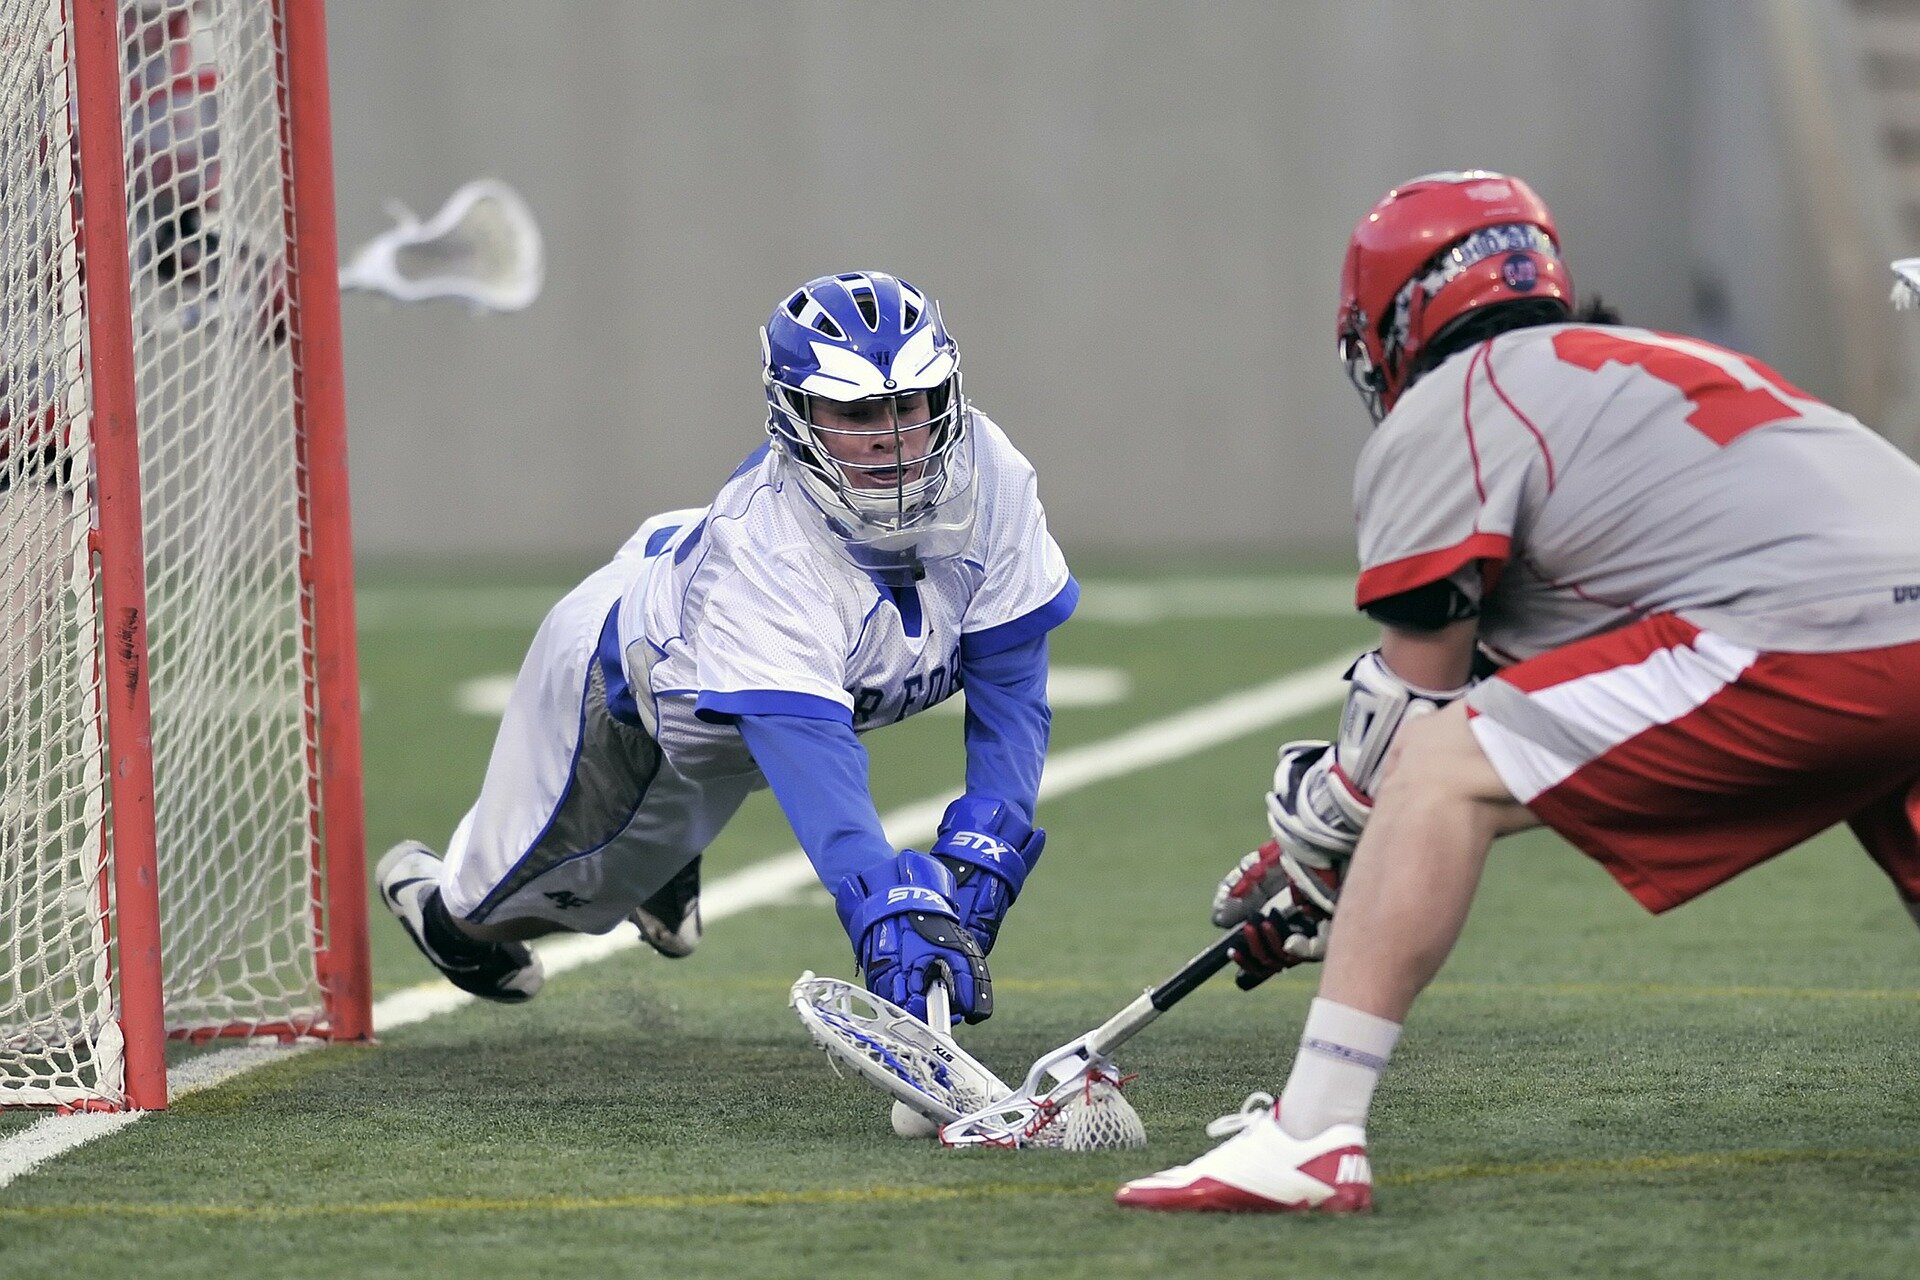 #Mandated headgear may lower concussion risk among high school lacrosse players